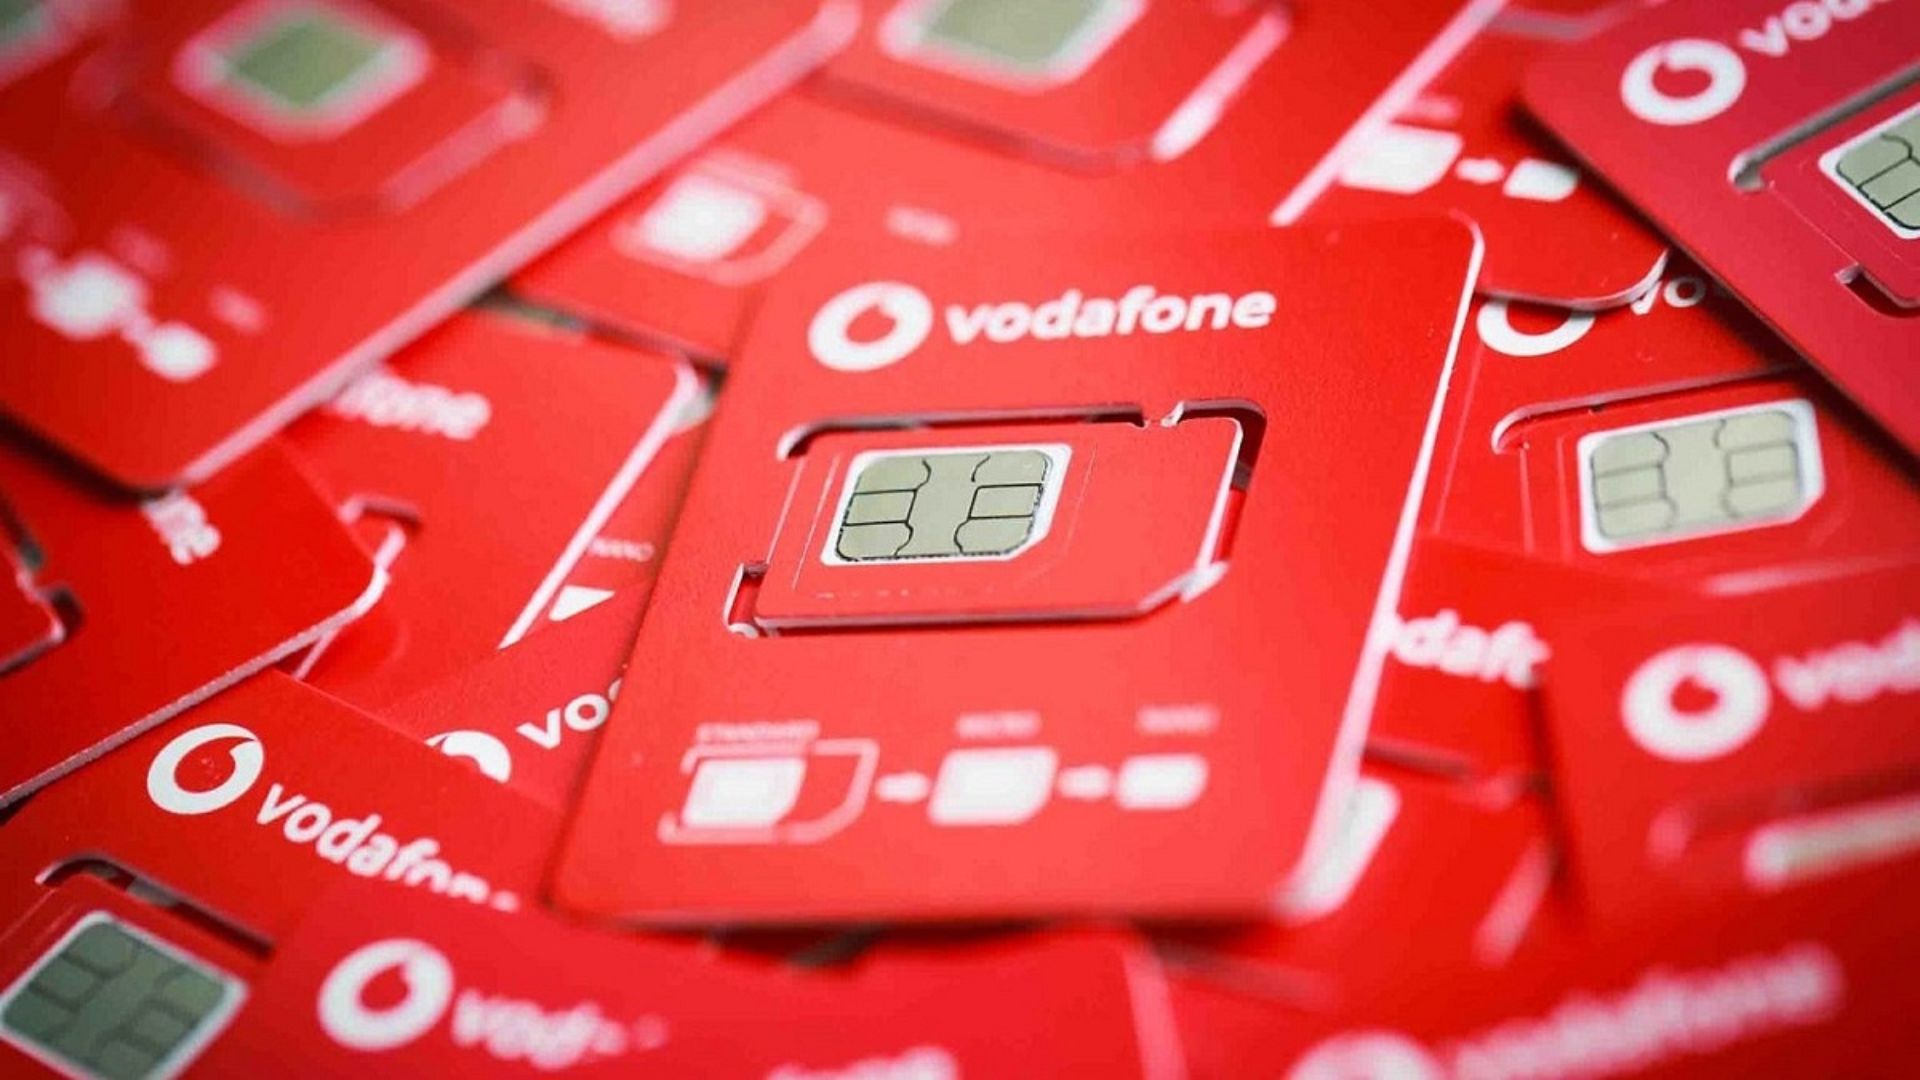 How to Block Vodafone SIM? Within few minutes